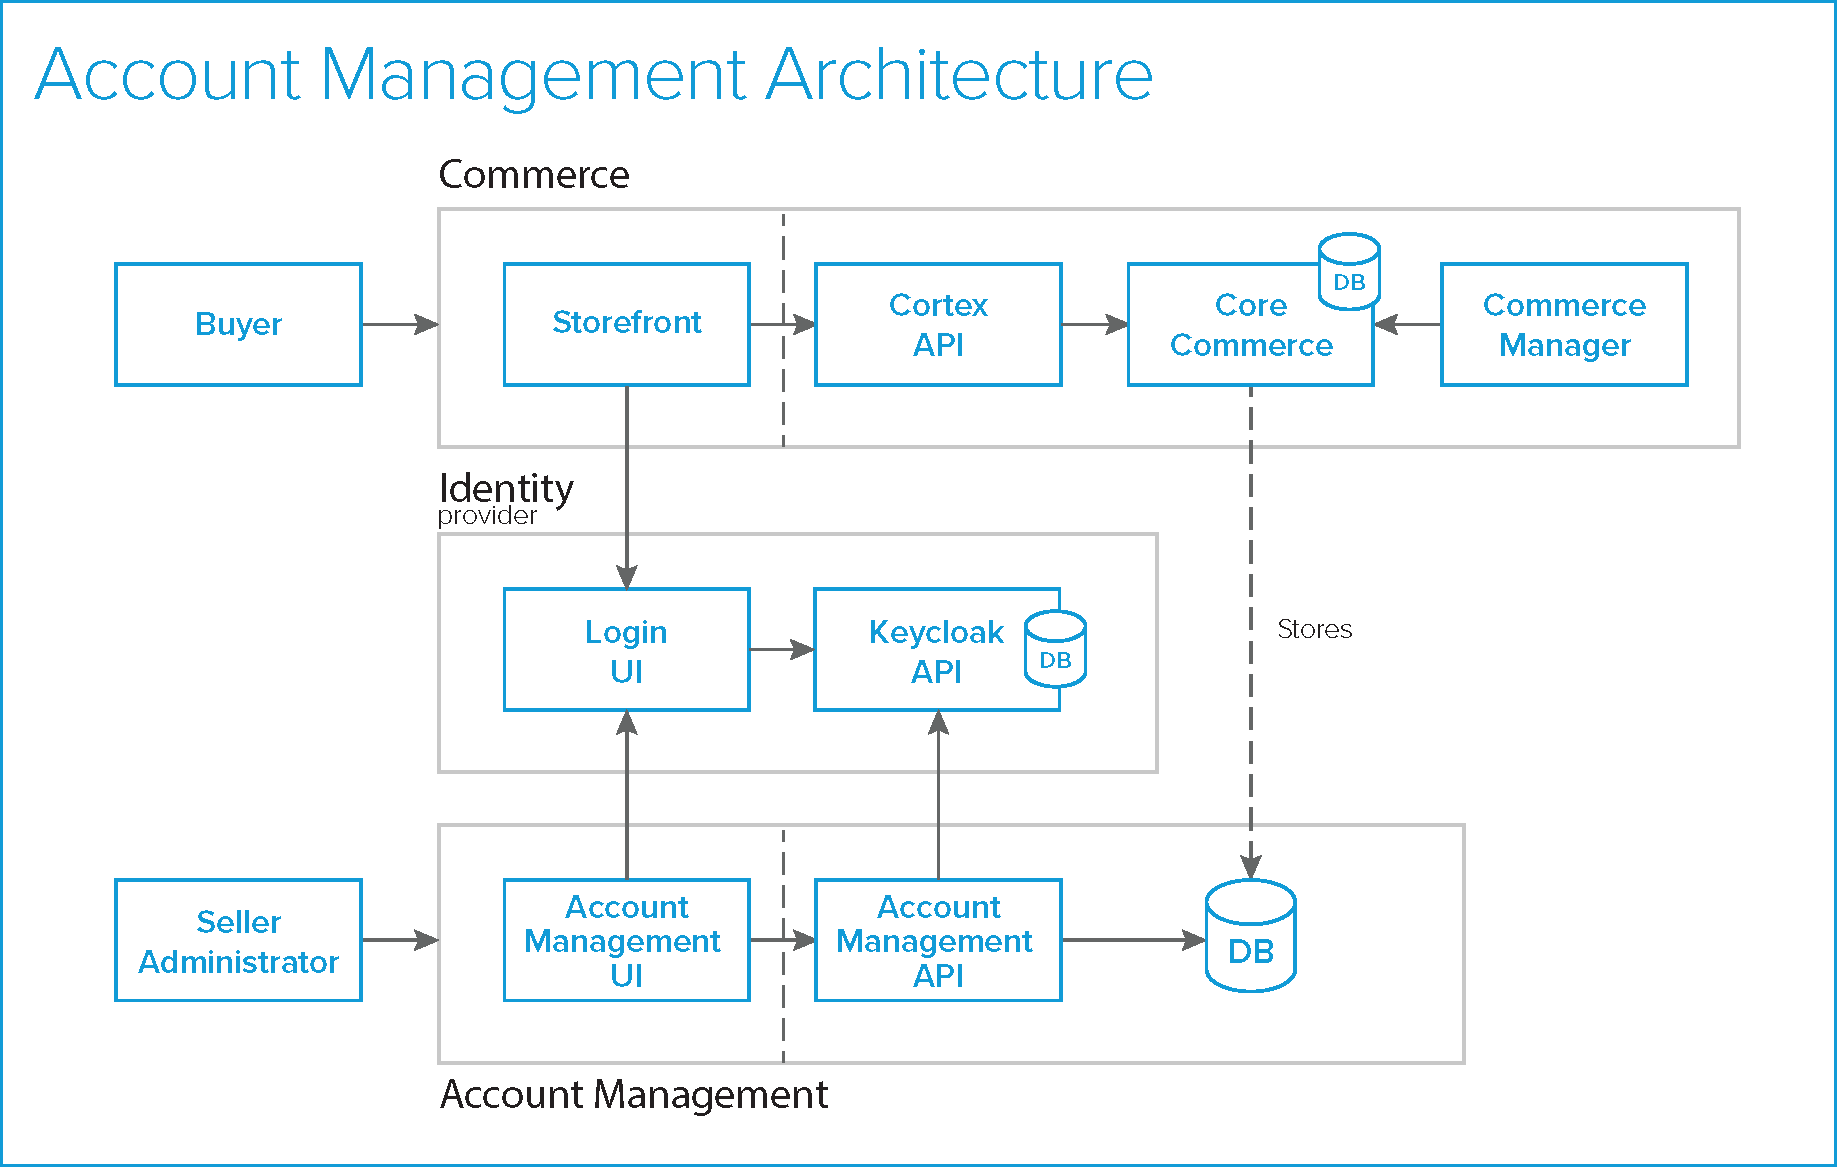 Account Management workflow overview